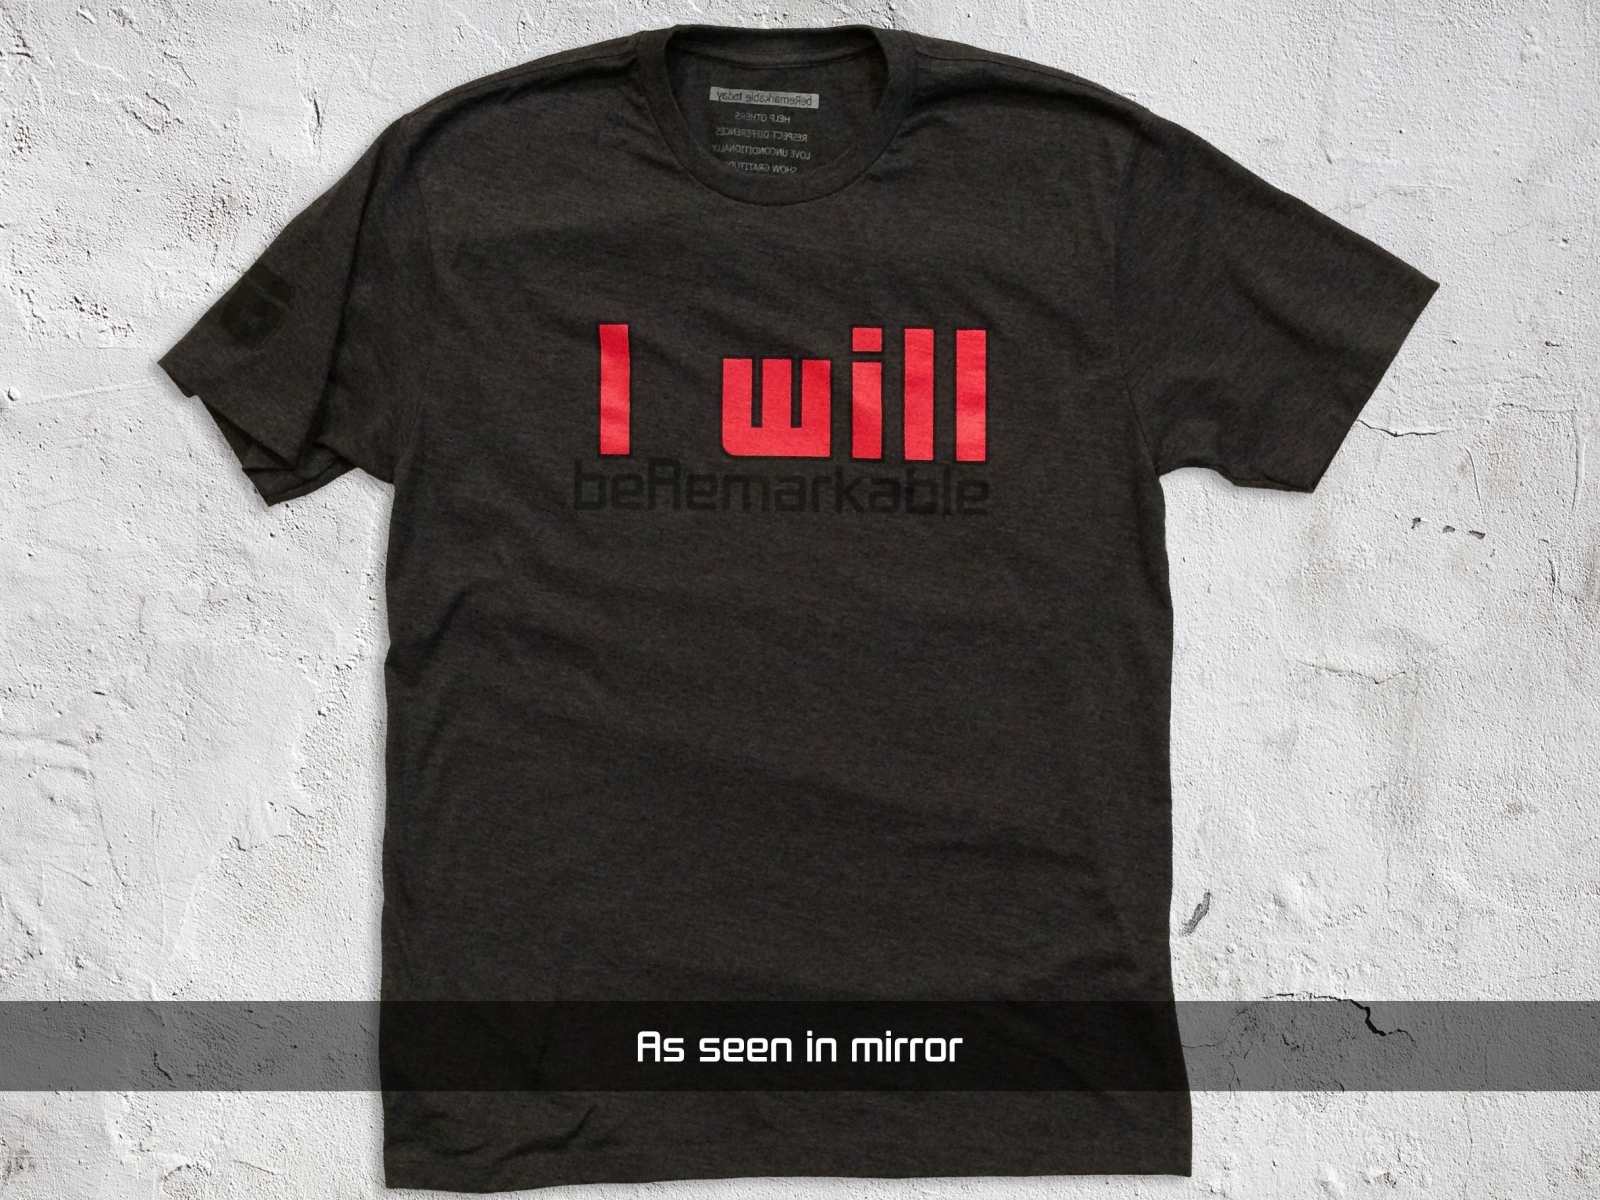 I Will beRemarkable – Men’s Charcoal T-shirt (as seen in mirror)